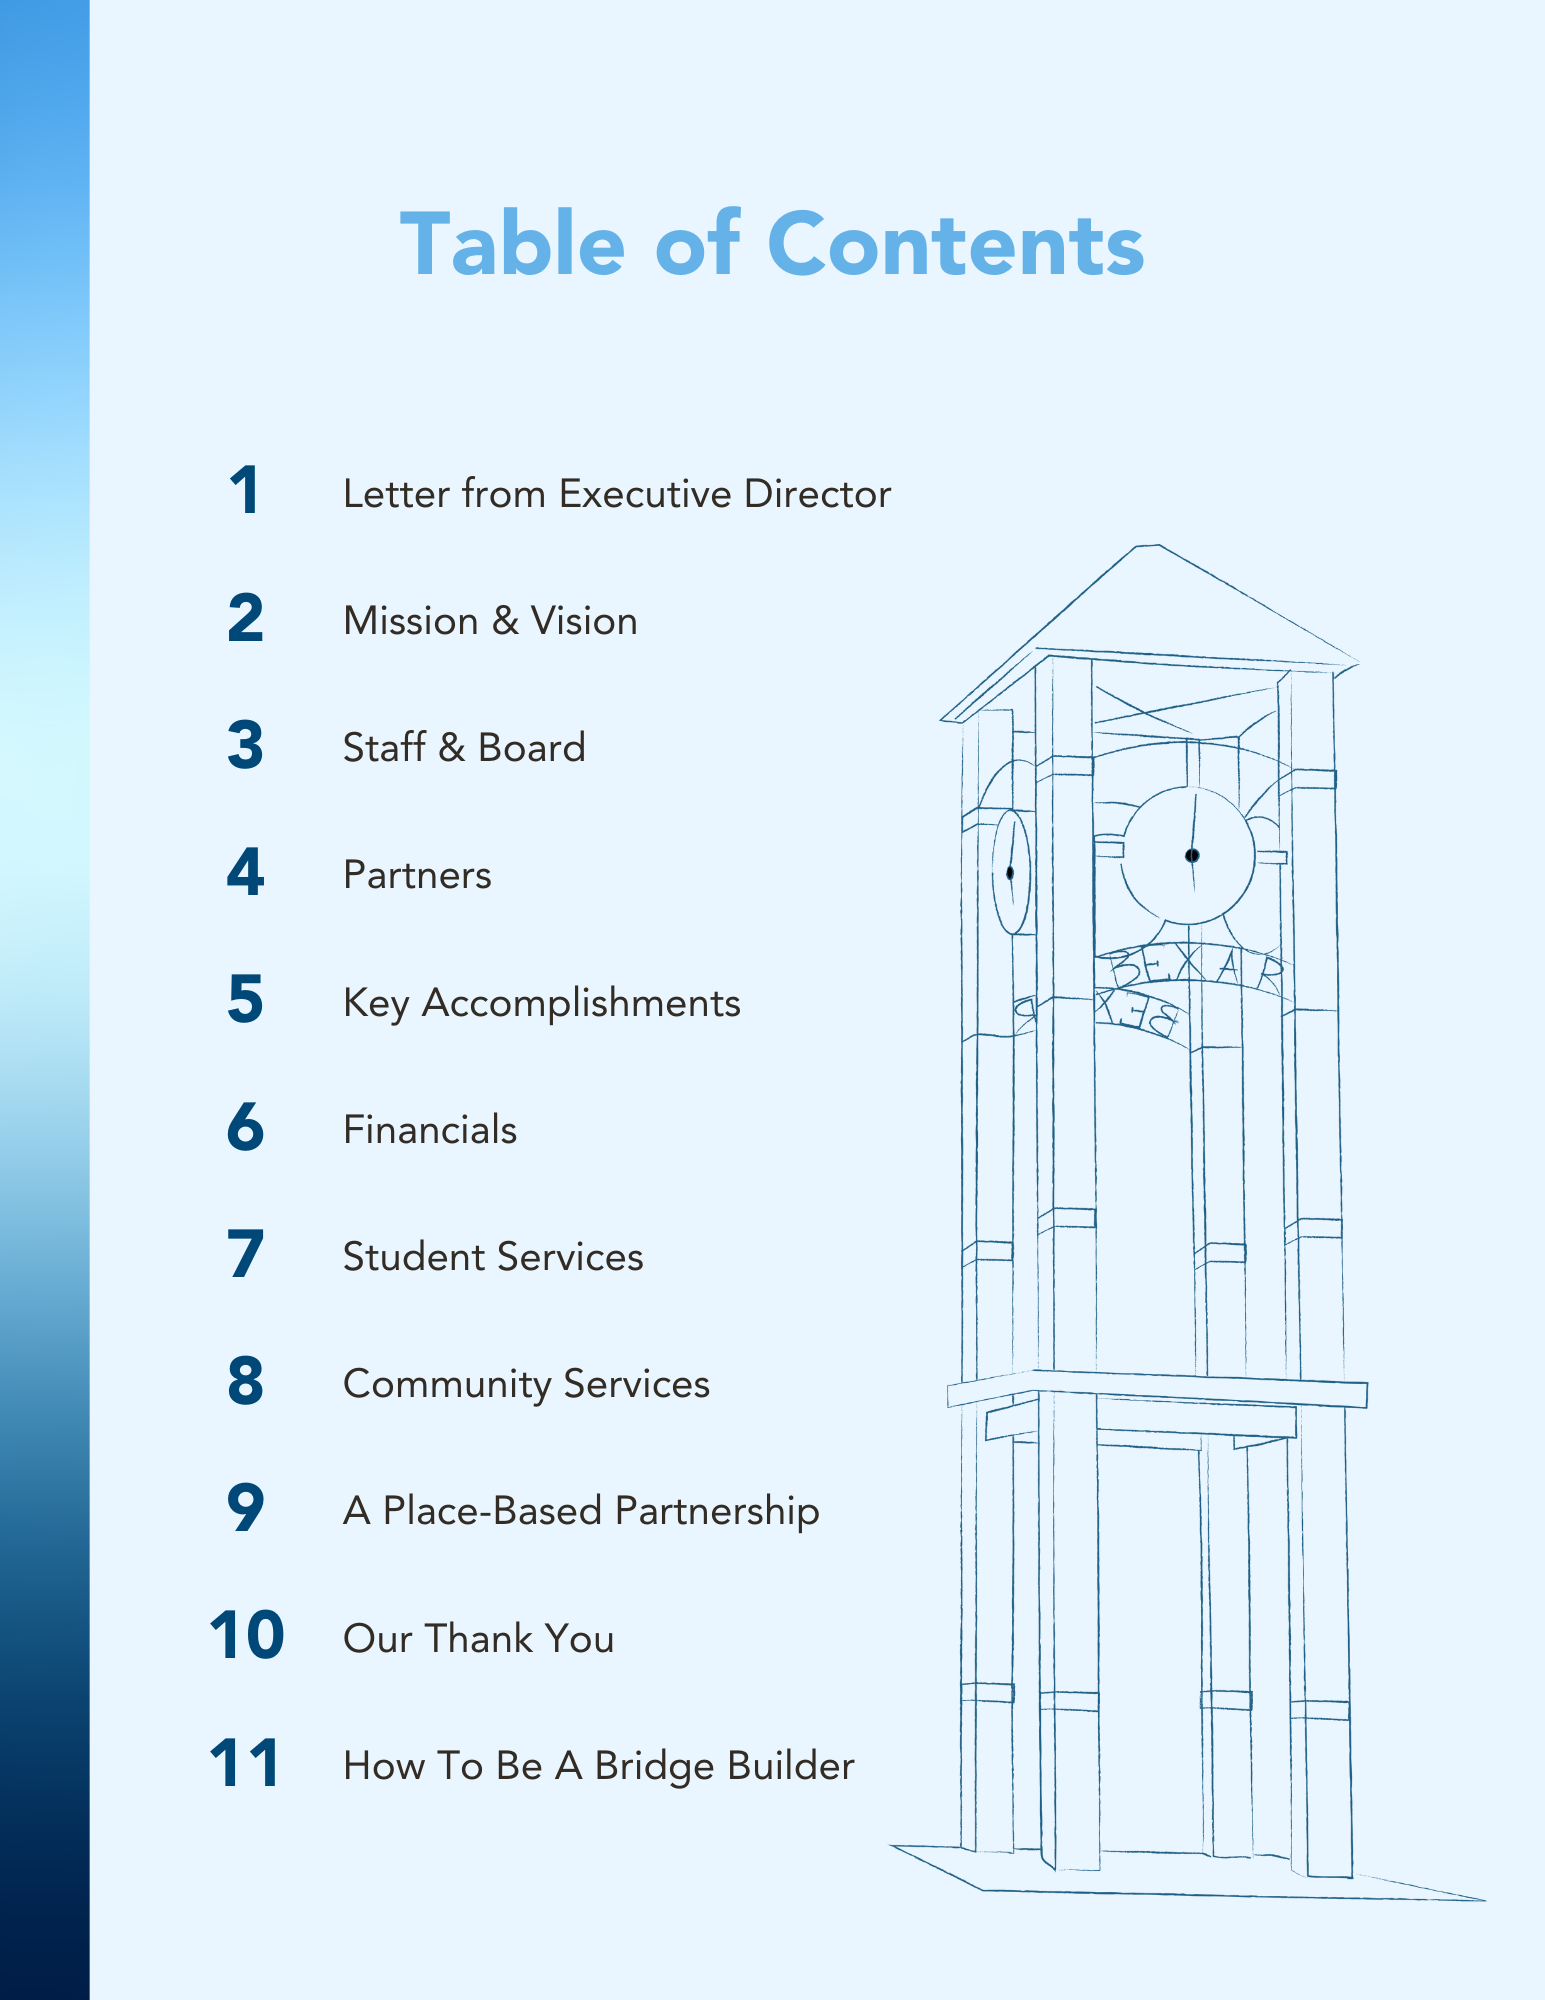 Table of Contents.png